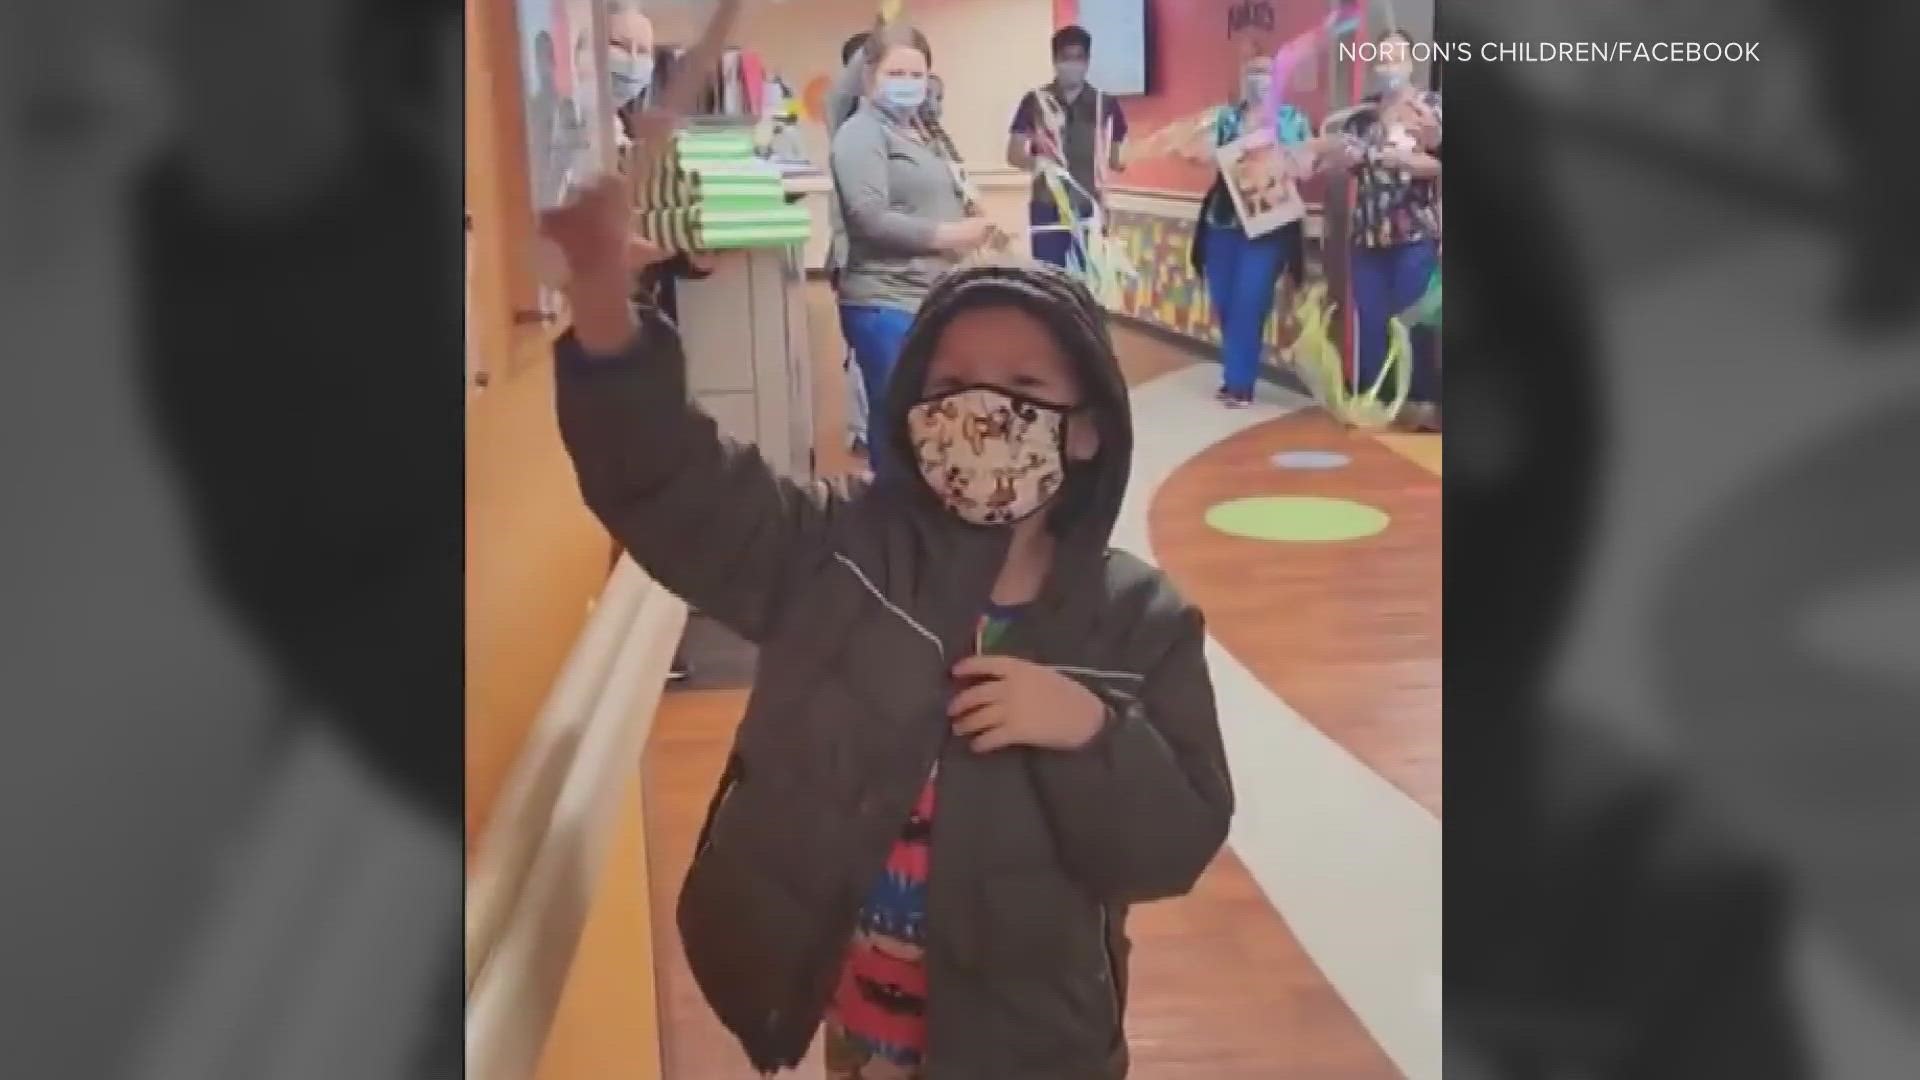 Aiden, 10, was diagnosed with T-cell Lymphoma last September, three days after his birthday.